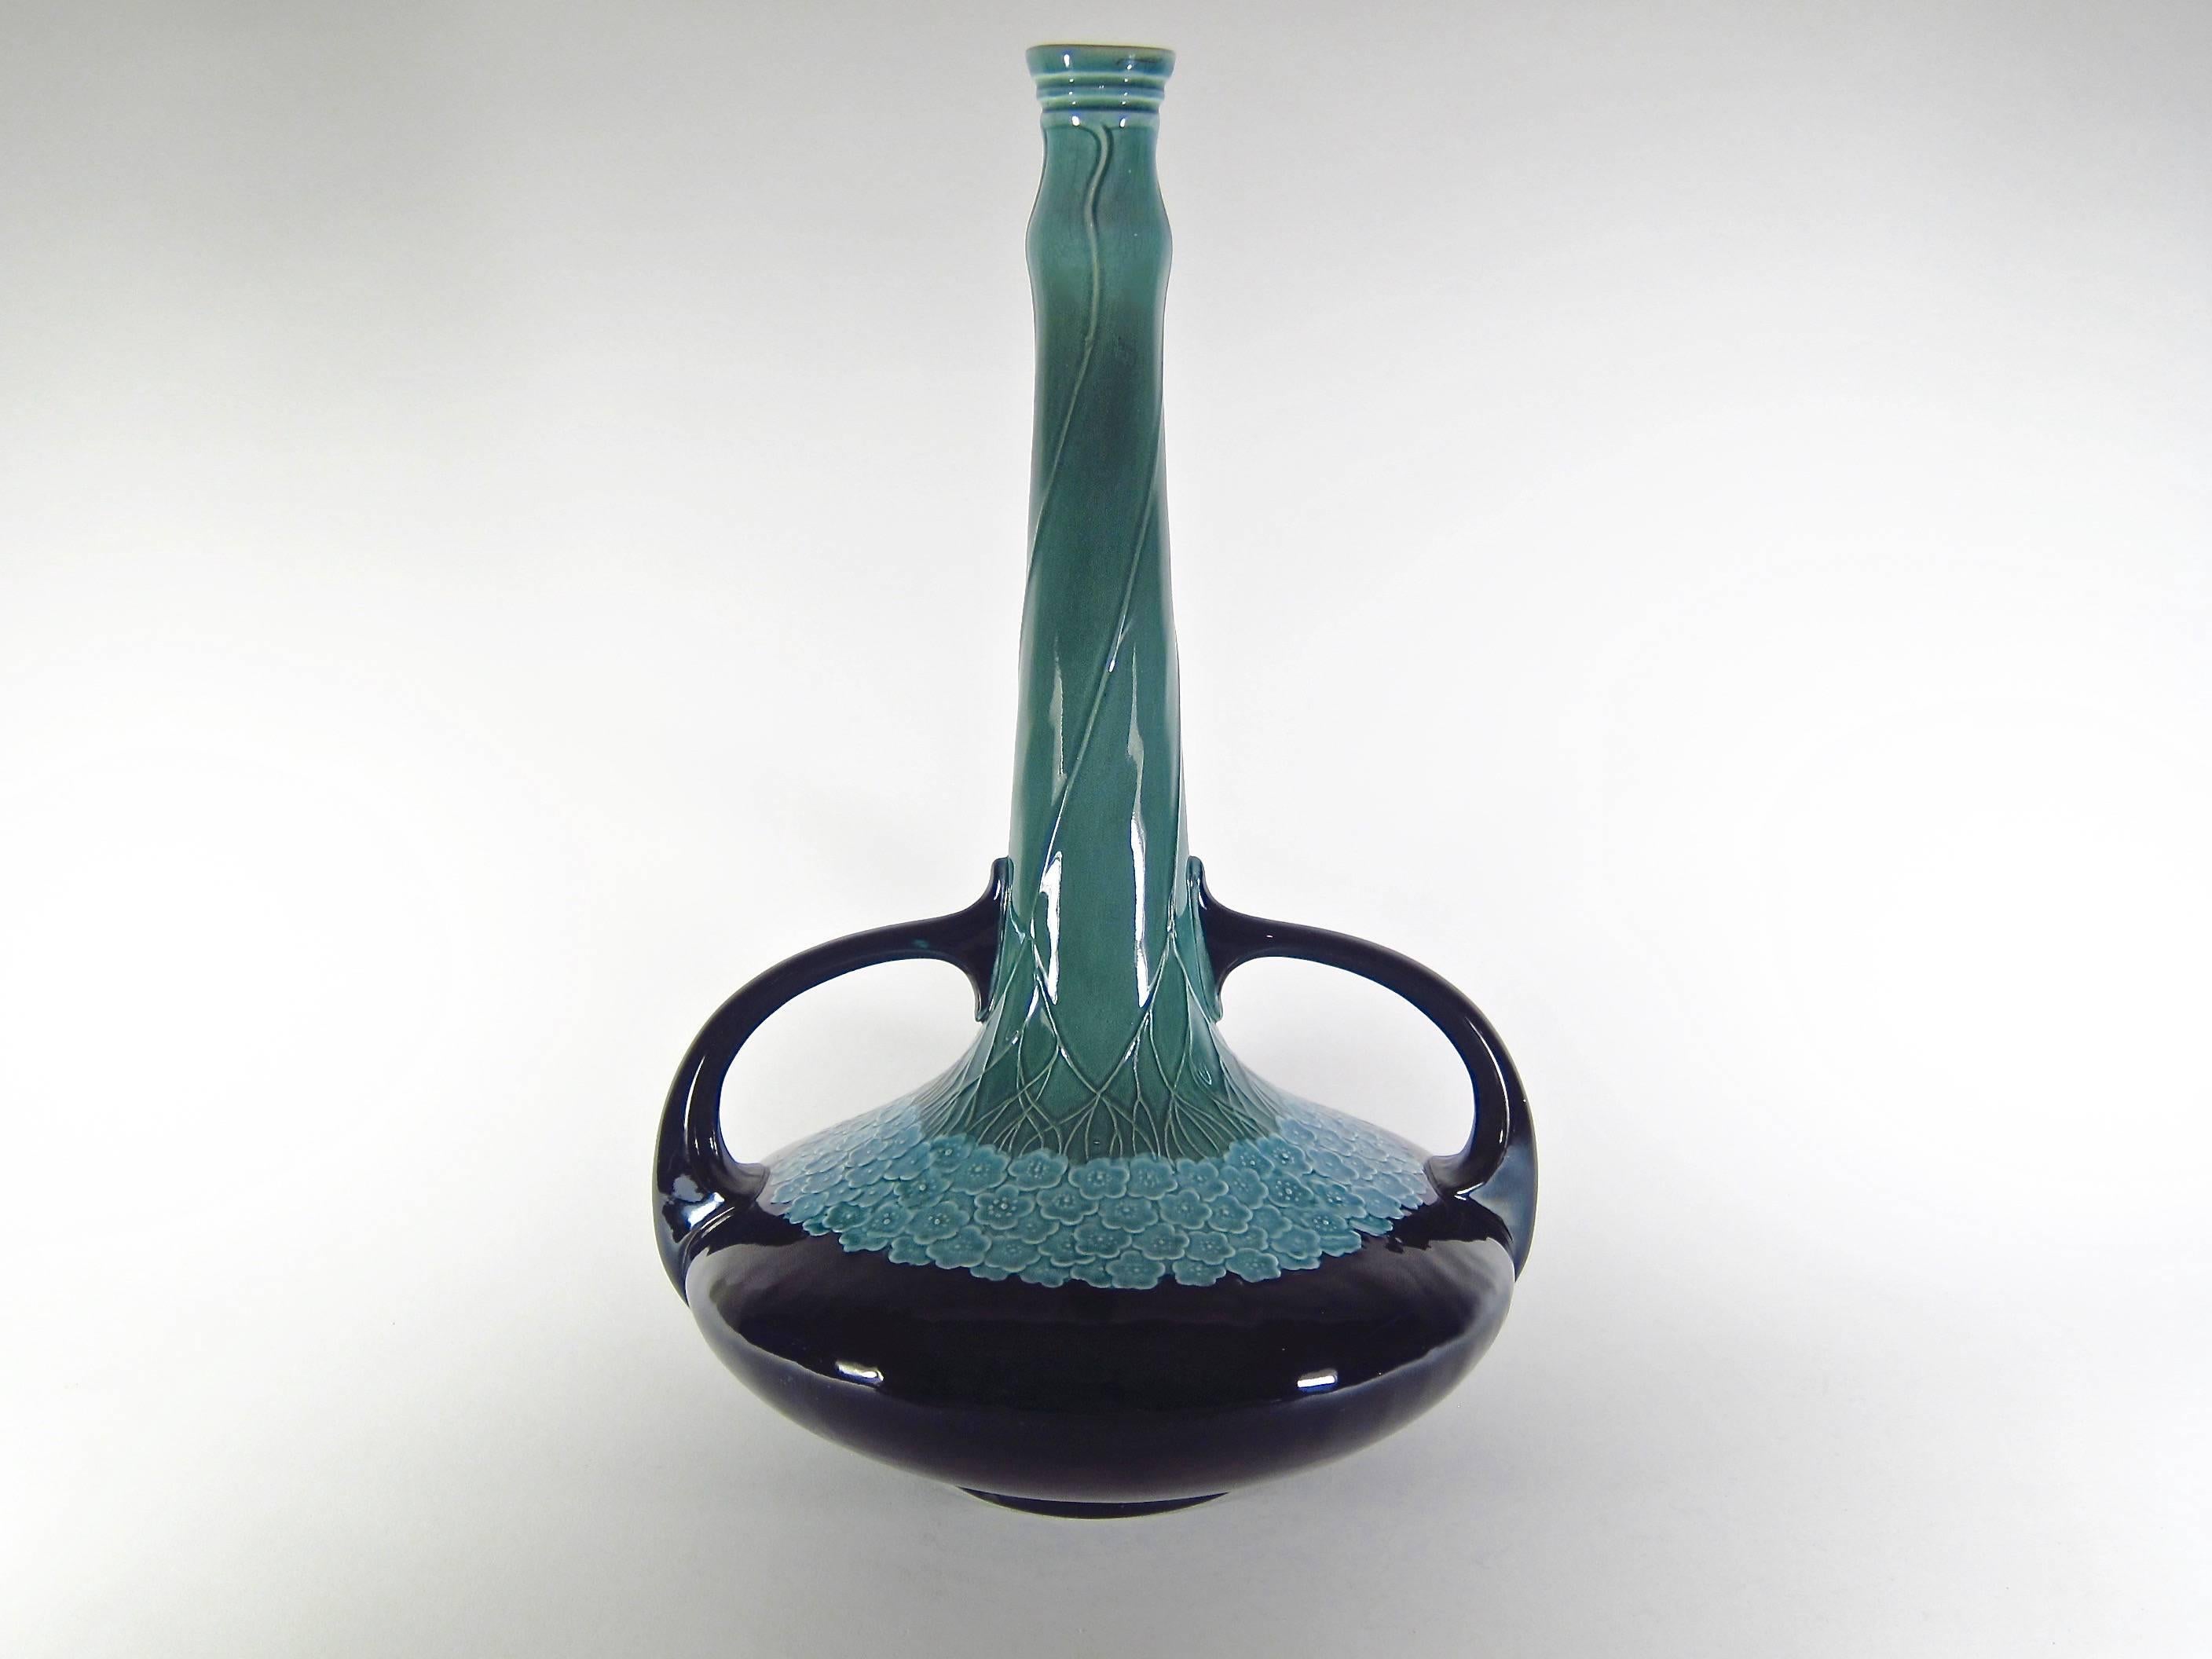 Glazed Art Nouveau Vase from Villeroy and Boch Mettlach, Marked 1904